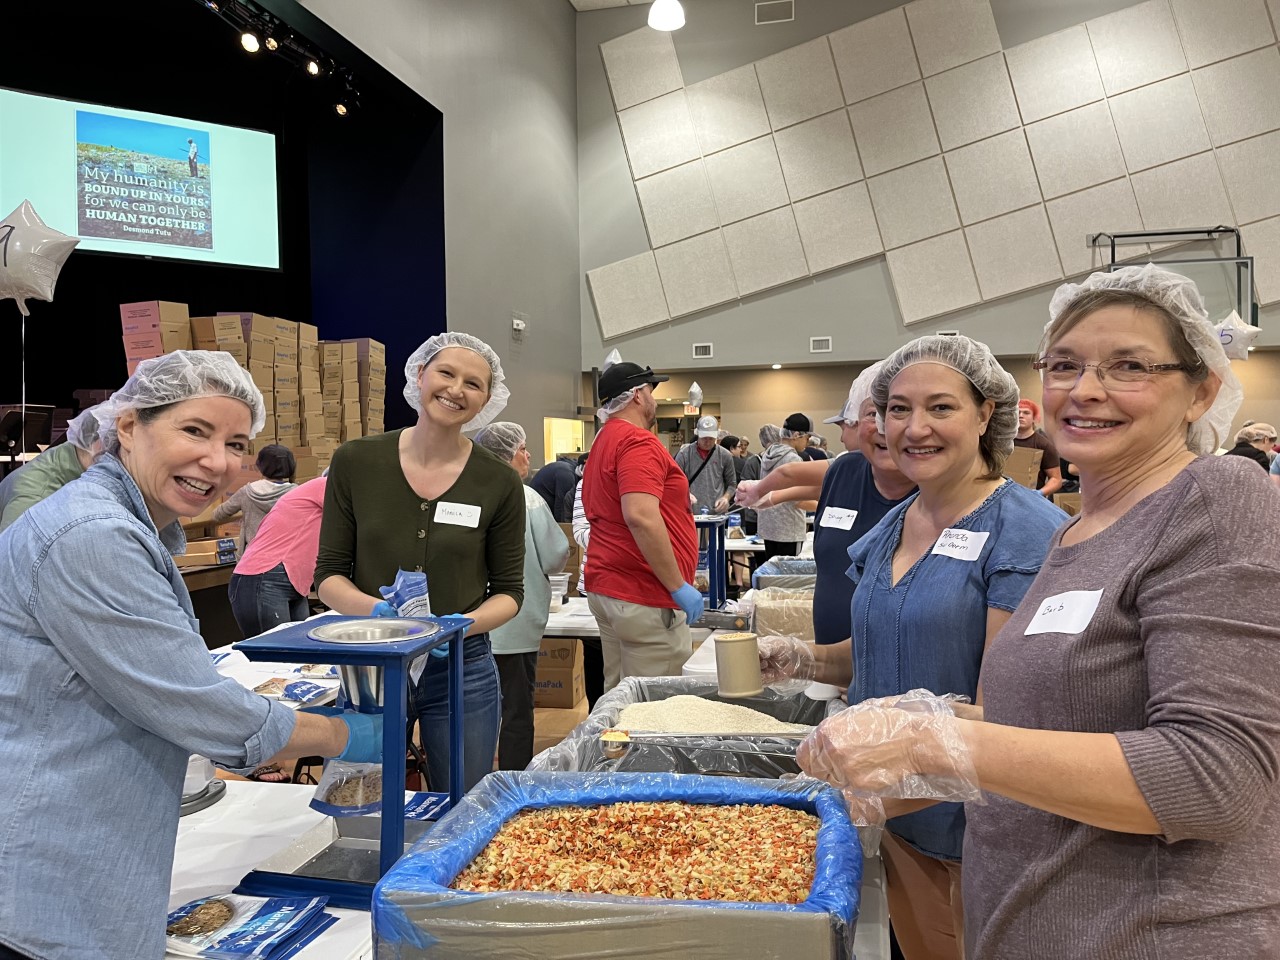 Volunteers wearing hairnets and gloves stand around a counter packing items for meals.